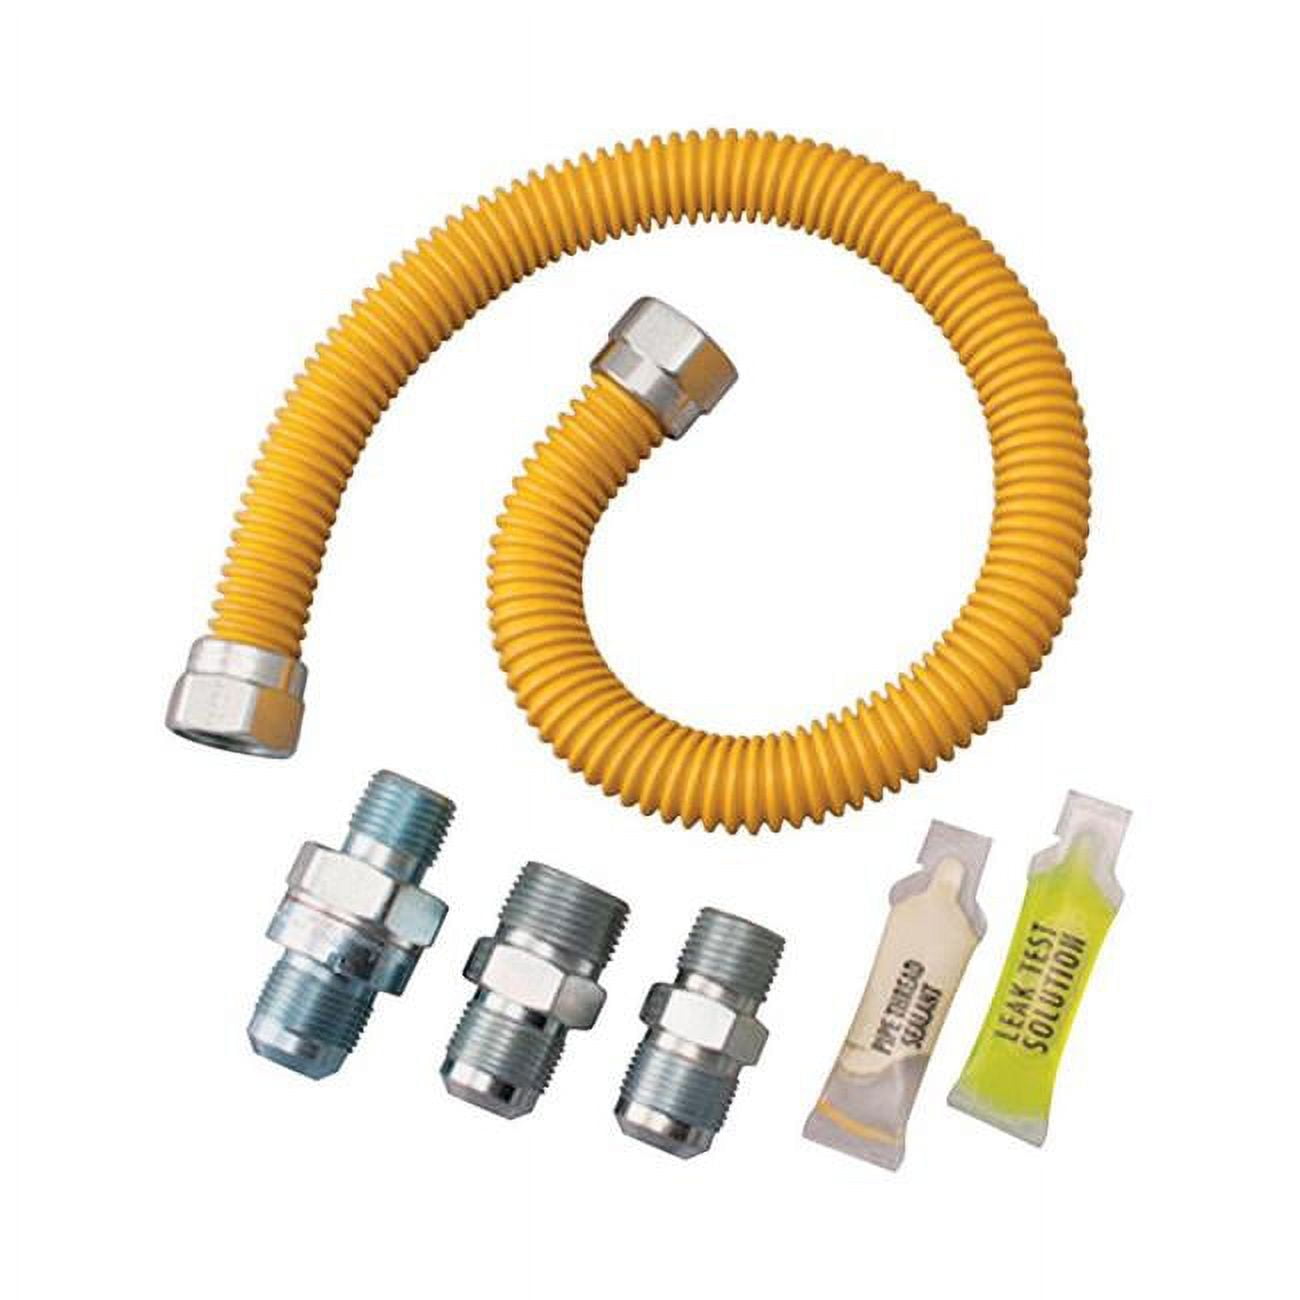 Stainless Steel OD Gas Appliance Connector Kit, 0.62 x 0.62 in. Dia. x 48 in -  Dormont, DO6761